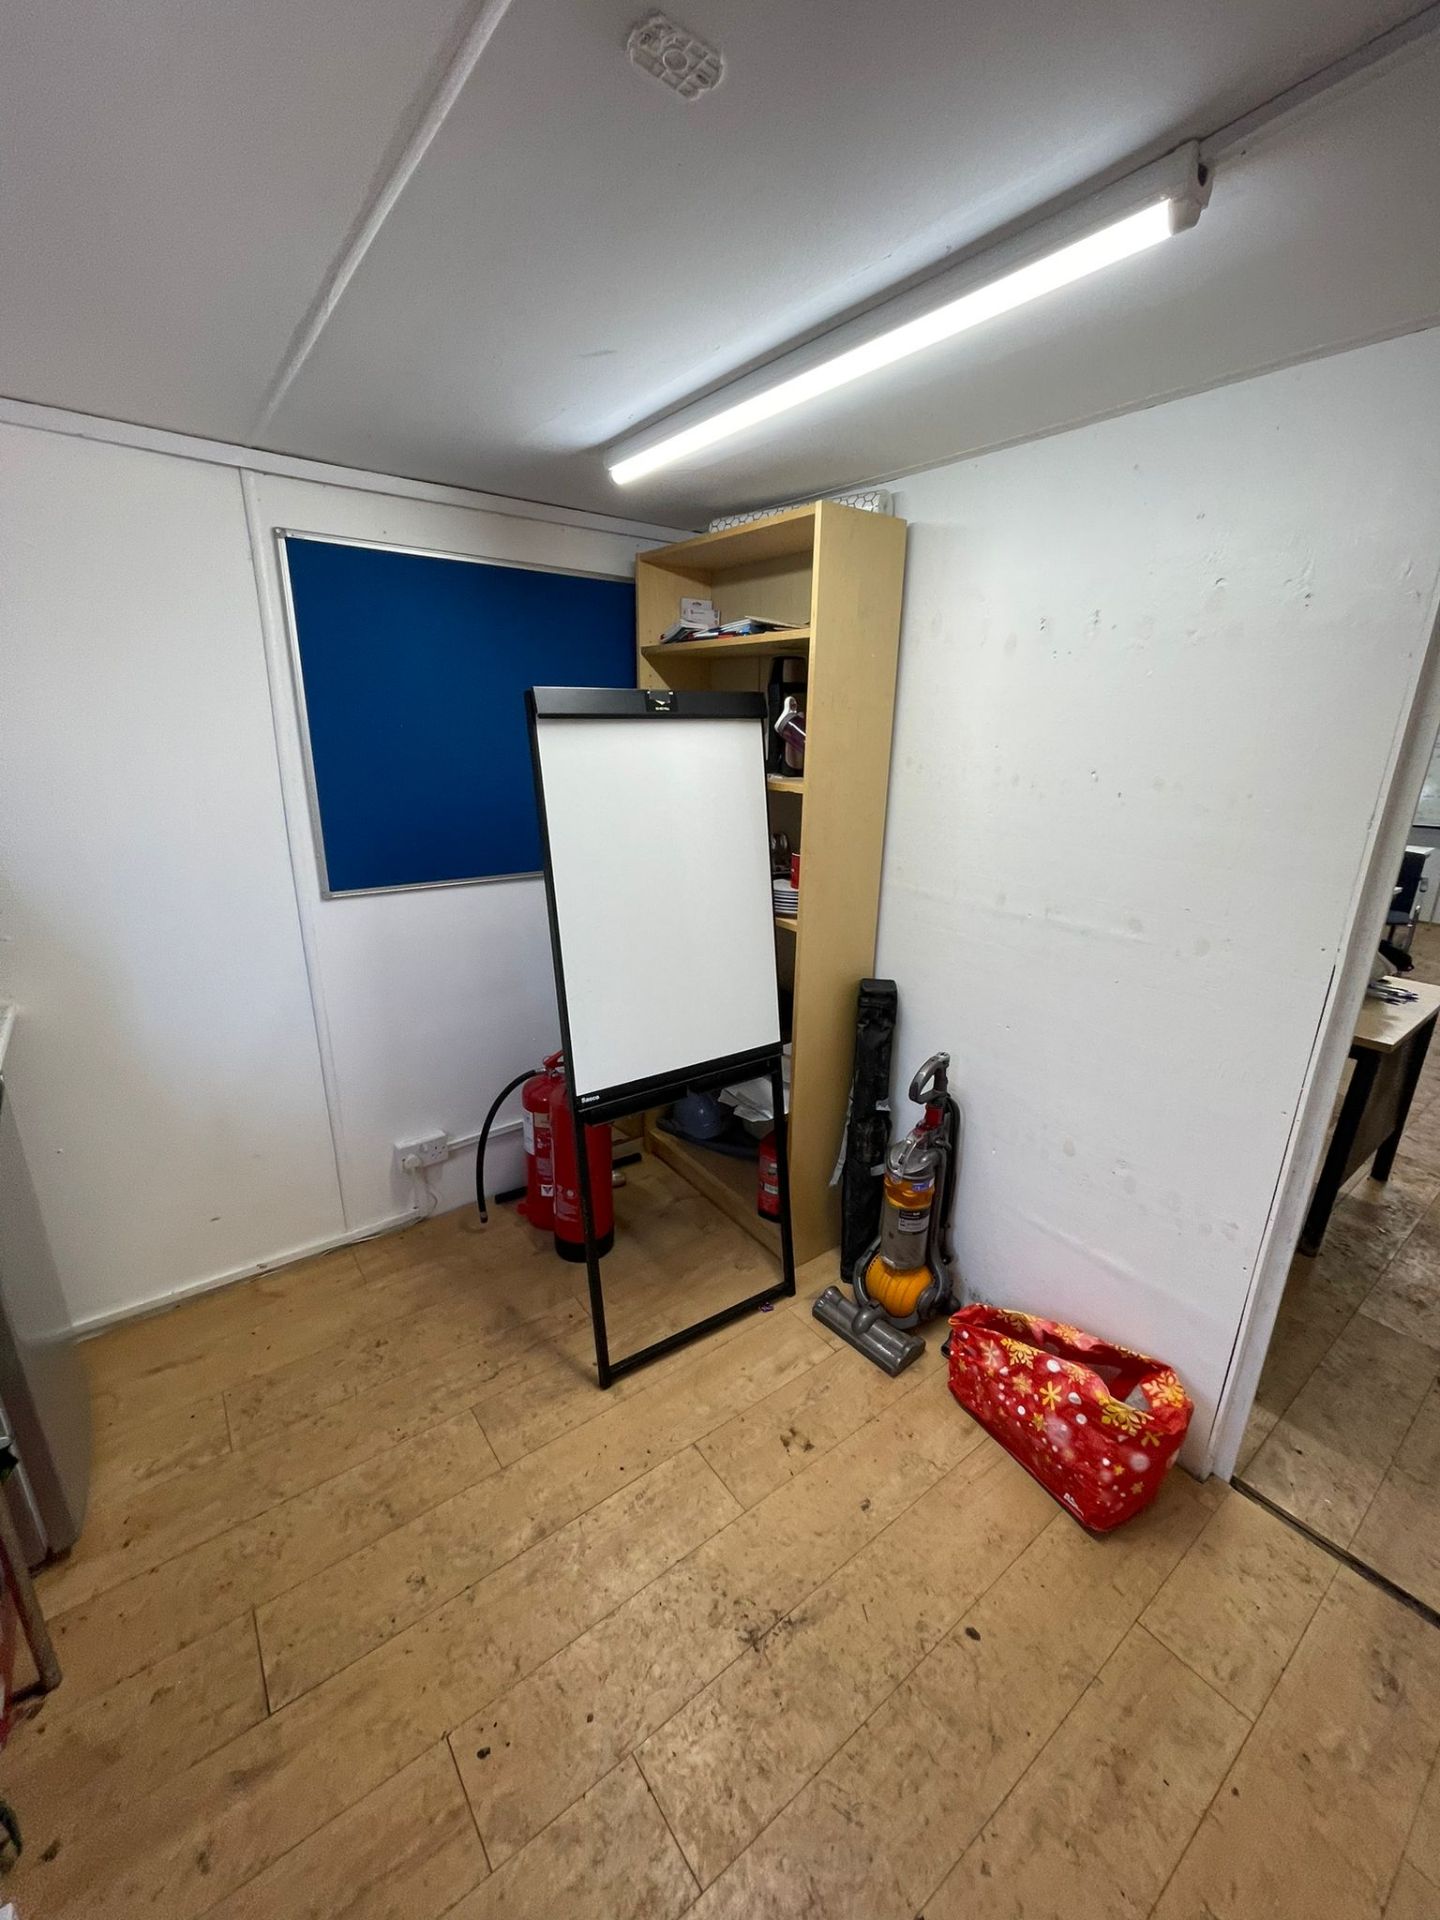 32FT X 10FT ANTI-VANDAL CABIN - OFFICE/ TRAINING ROOM AND SMALL CANTEEN AREA. - Bild 2 aus 8